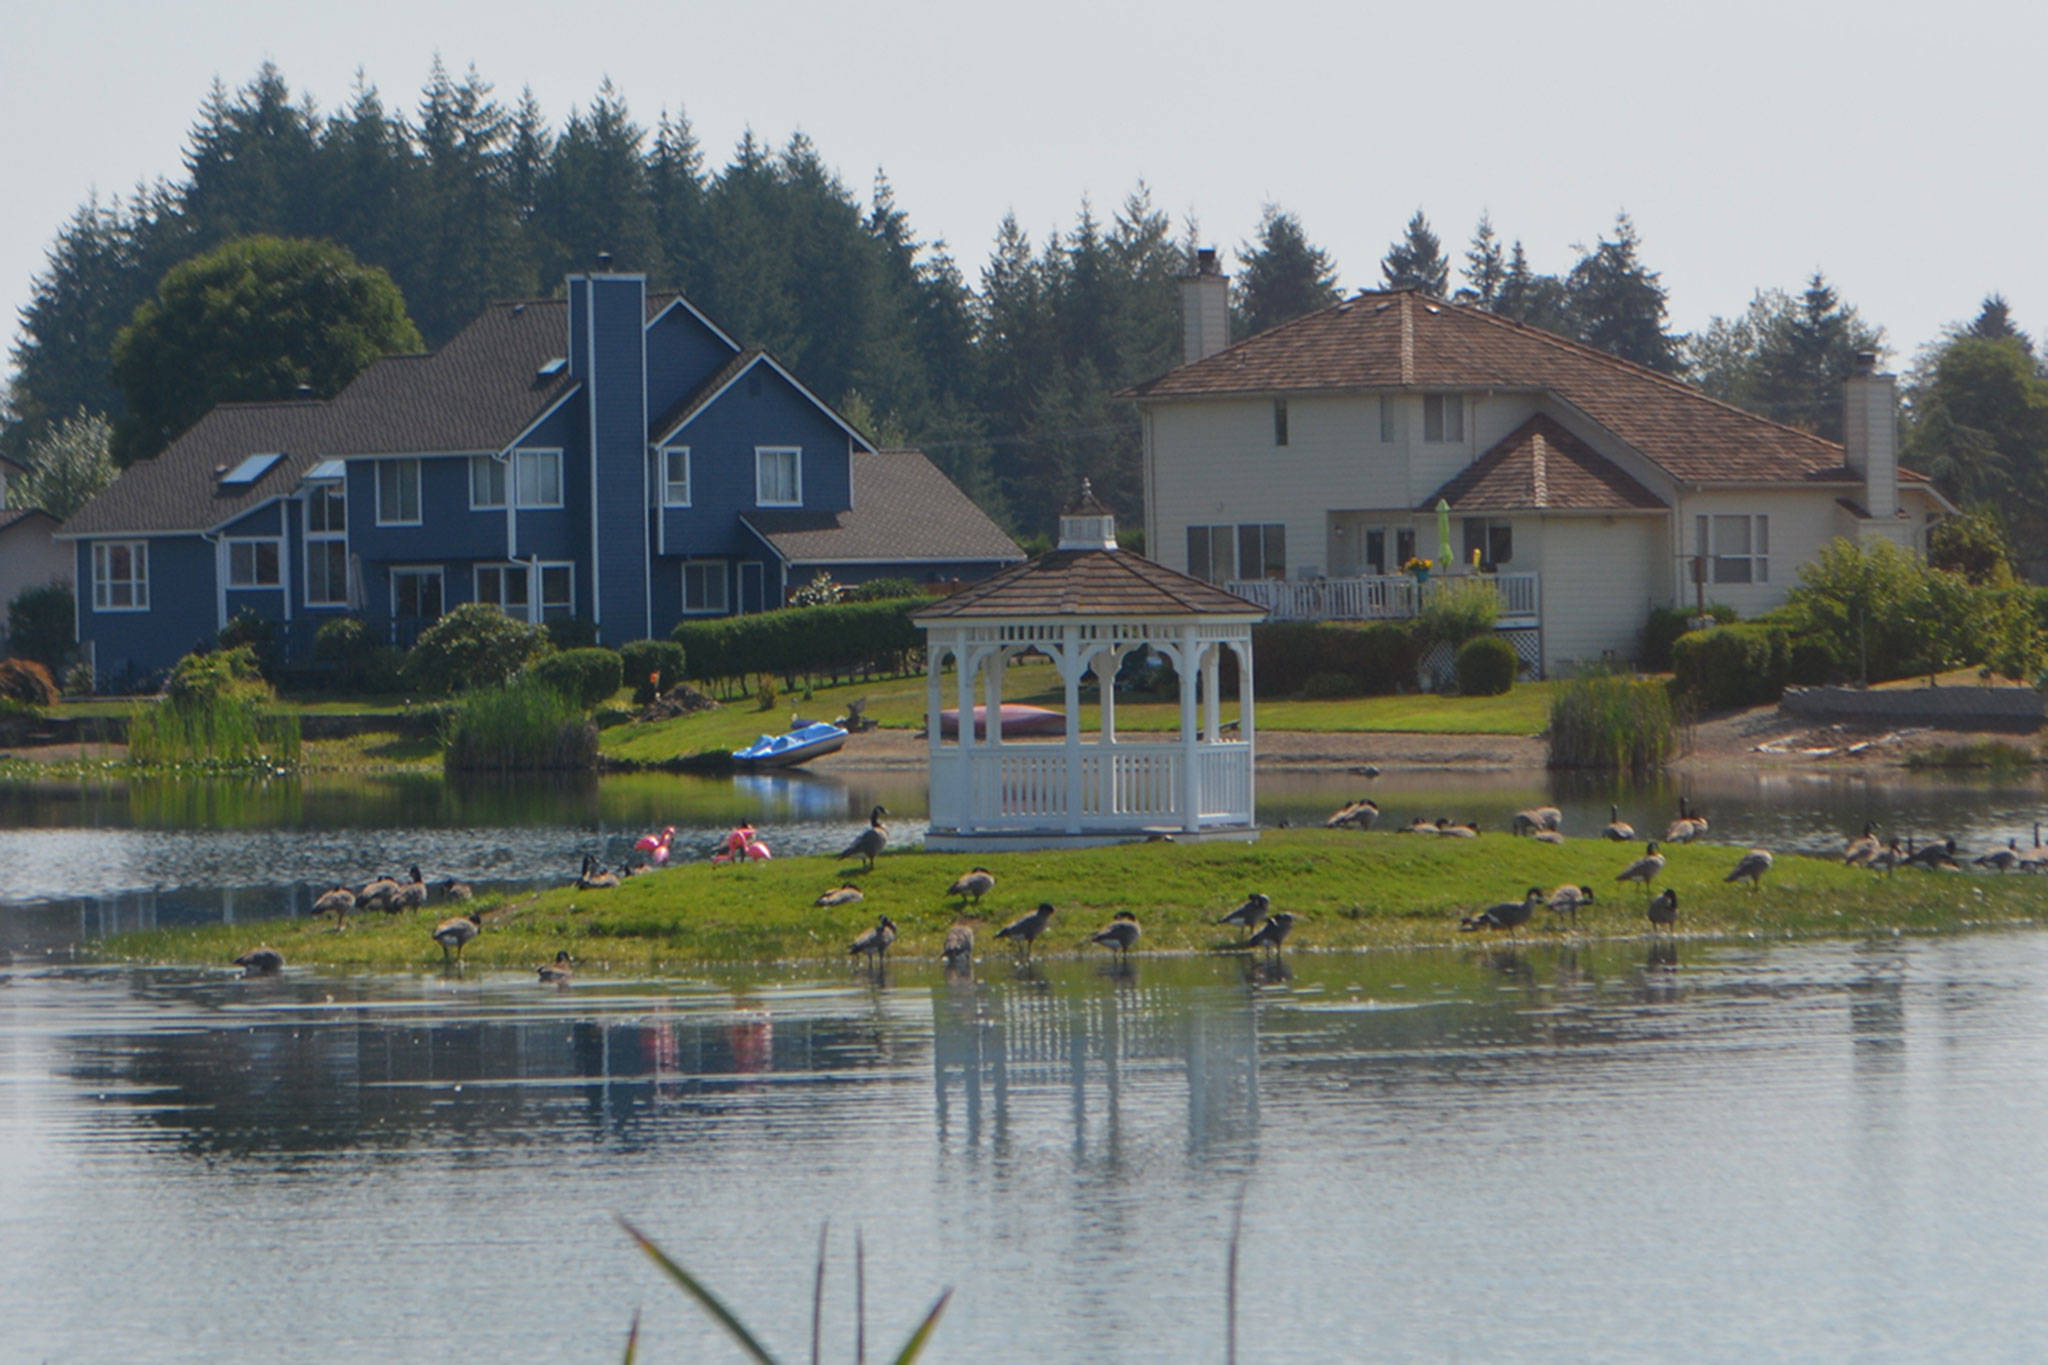 Tulalip Tribes appeal development near reservation